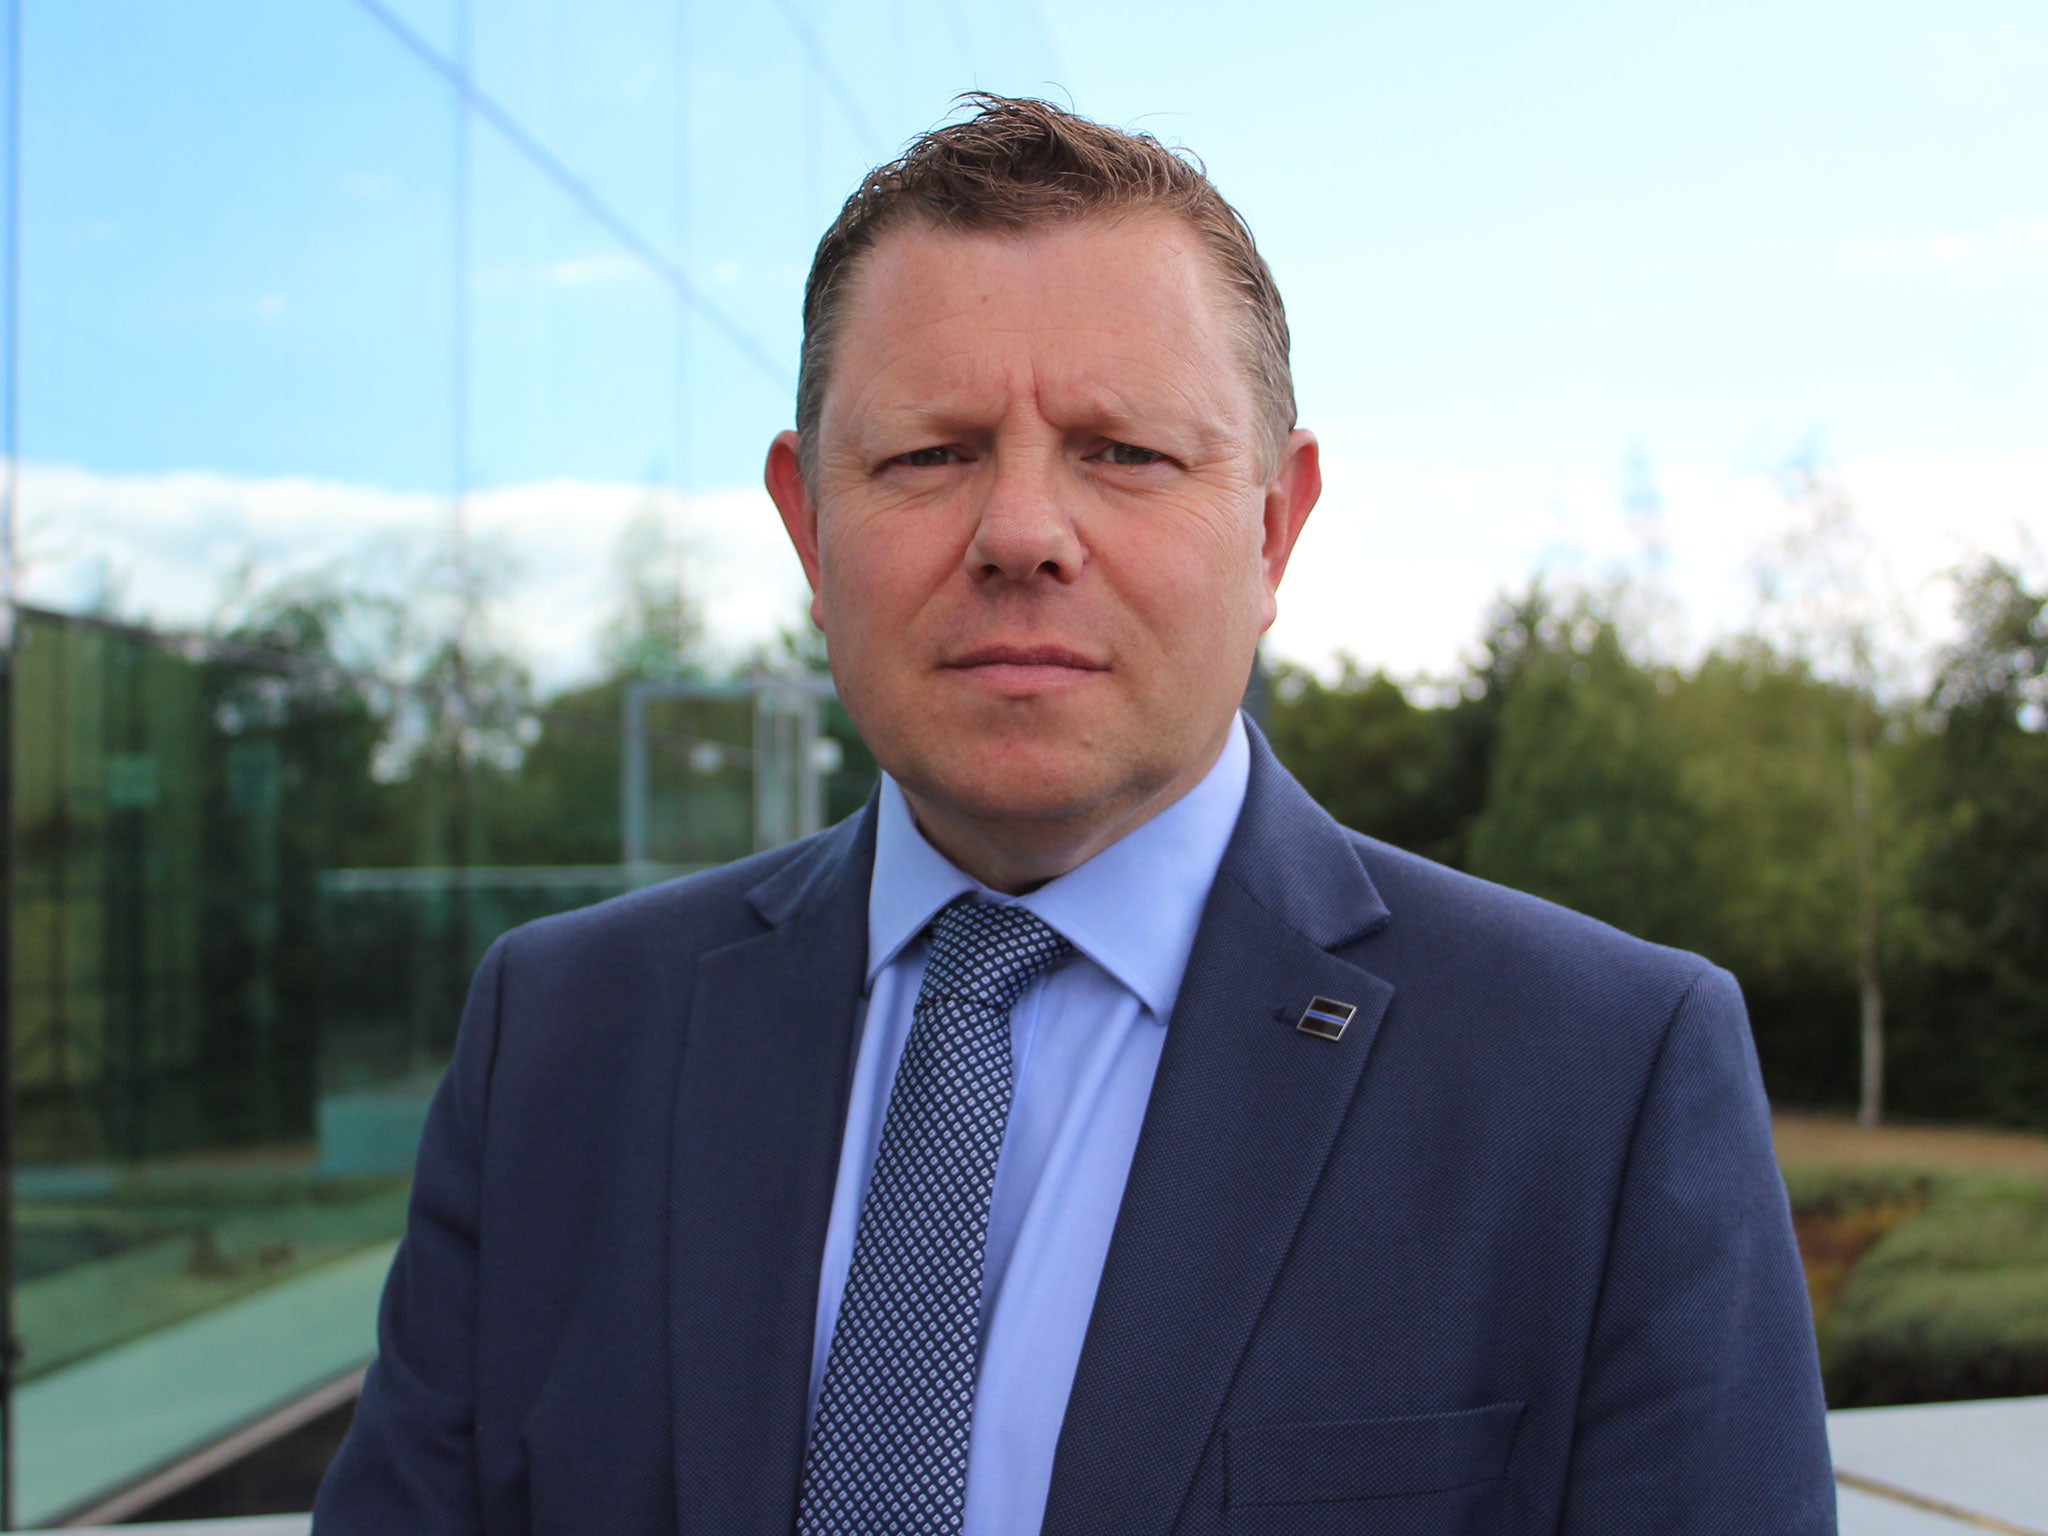 John Apter warns the public ‘are already suffering’ and ‘are going to suffer more’